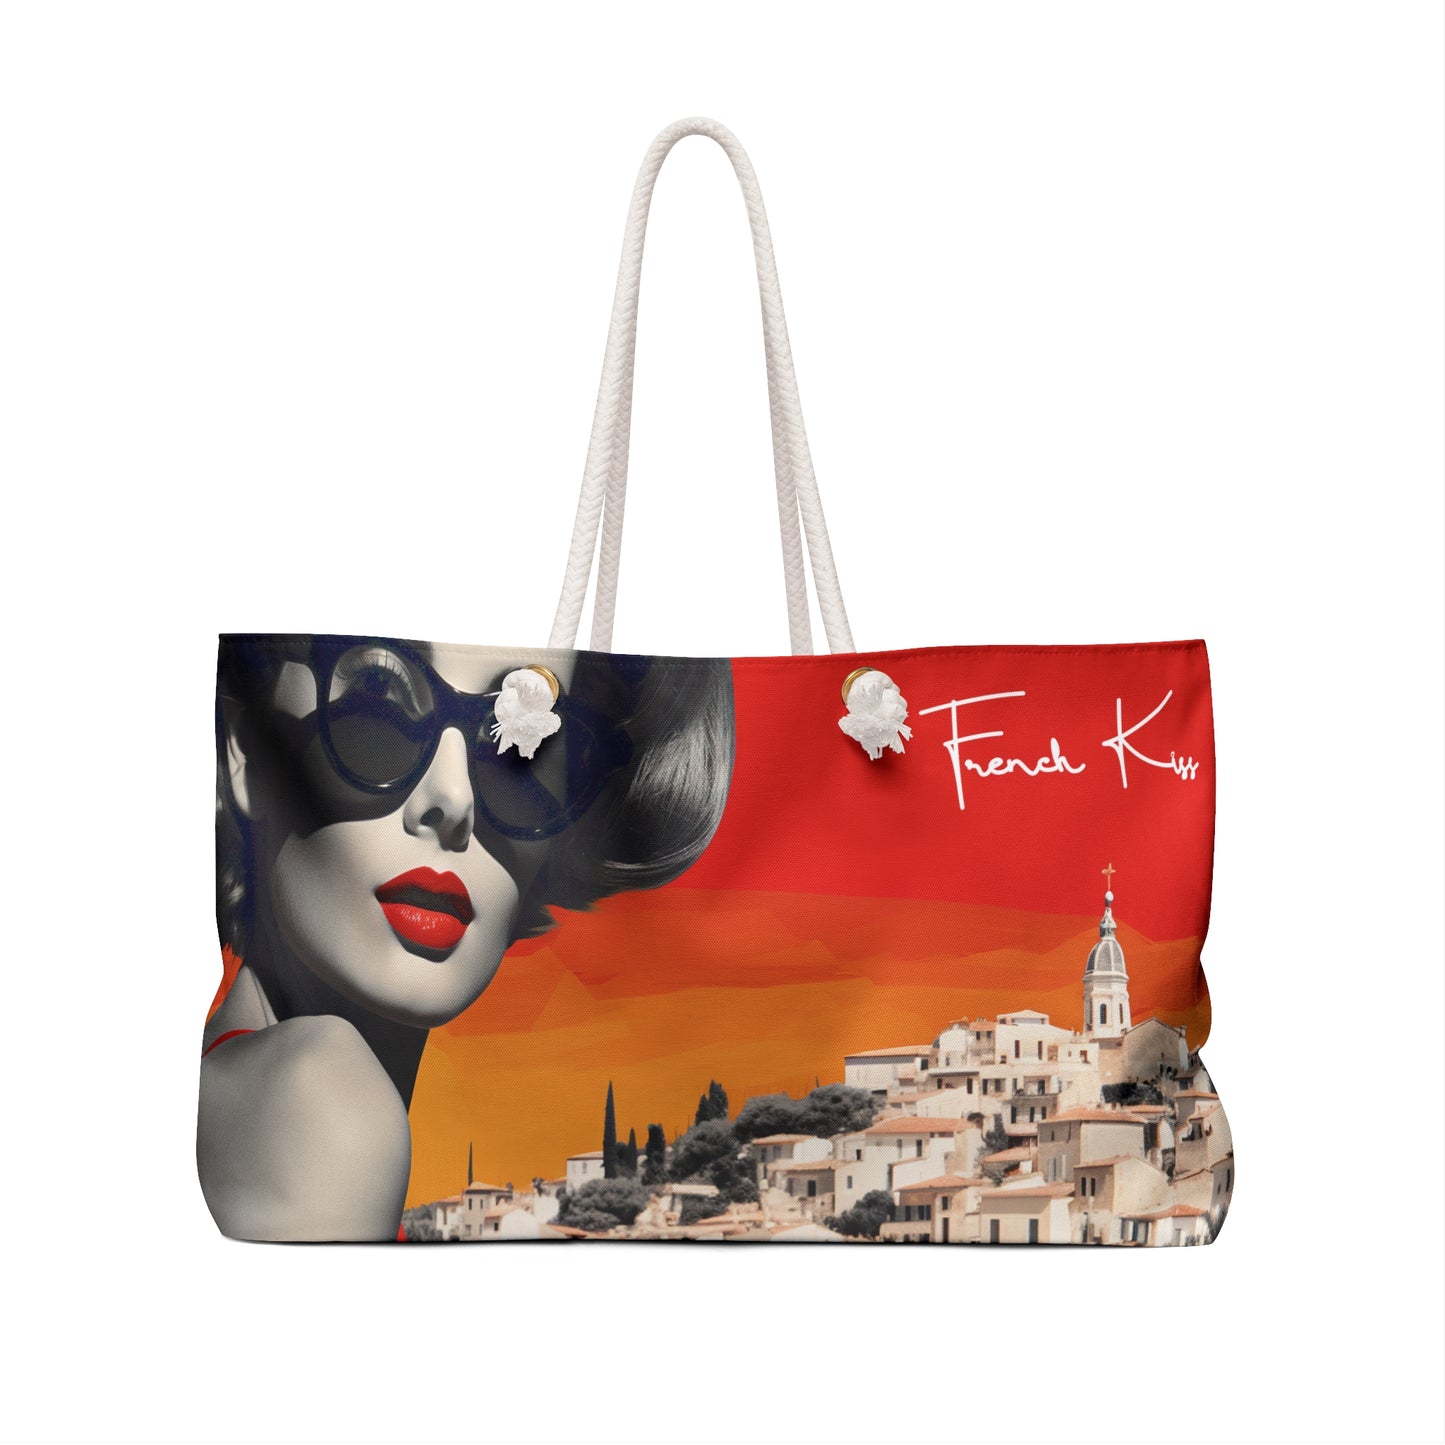 TOUT EN ROUGE Sassy Sexy Chic Weekender Accessory Bag French Kiss Pop Art, Classy, Couture, Travel, Fashion, Beauty gift item